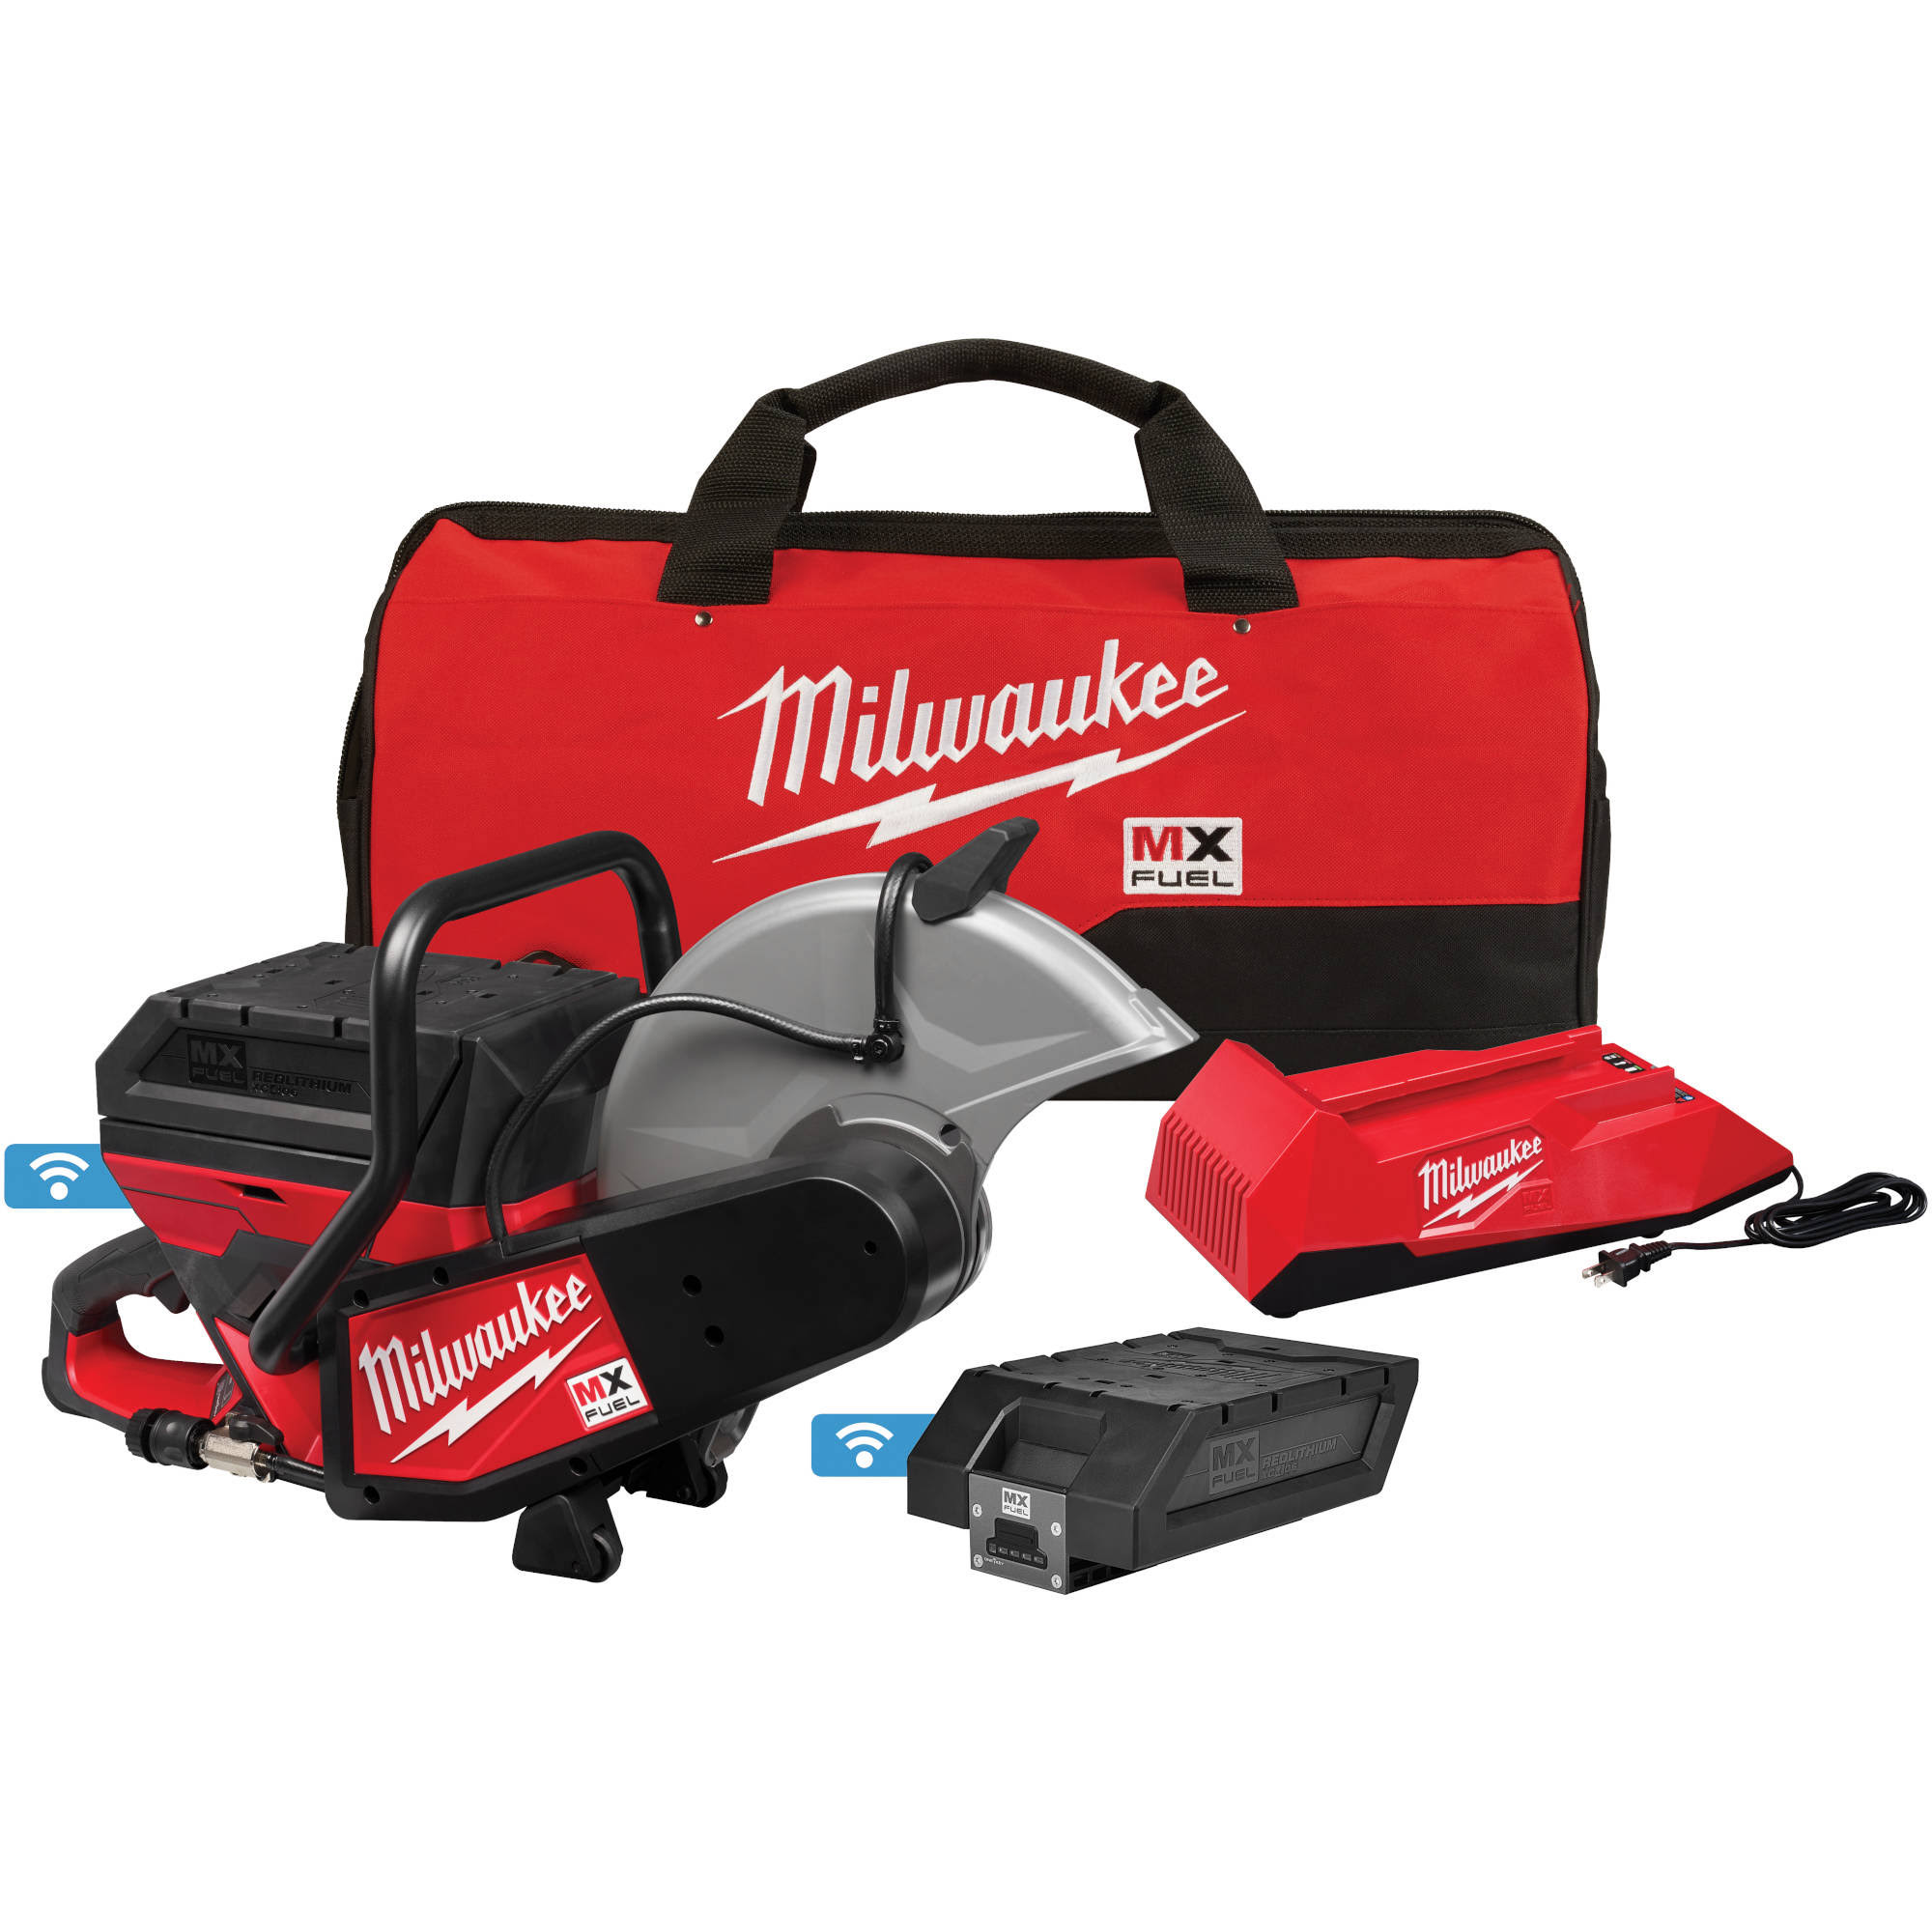 Milwaukee MX Fuel MXF314-2XC Cut-off Saw Kit, Lithium-Ion Battery, 14 in Dia Blade